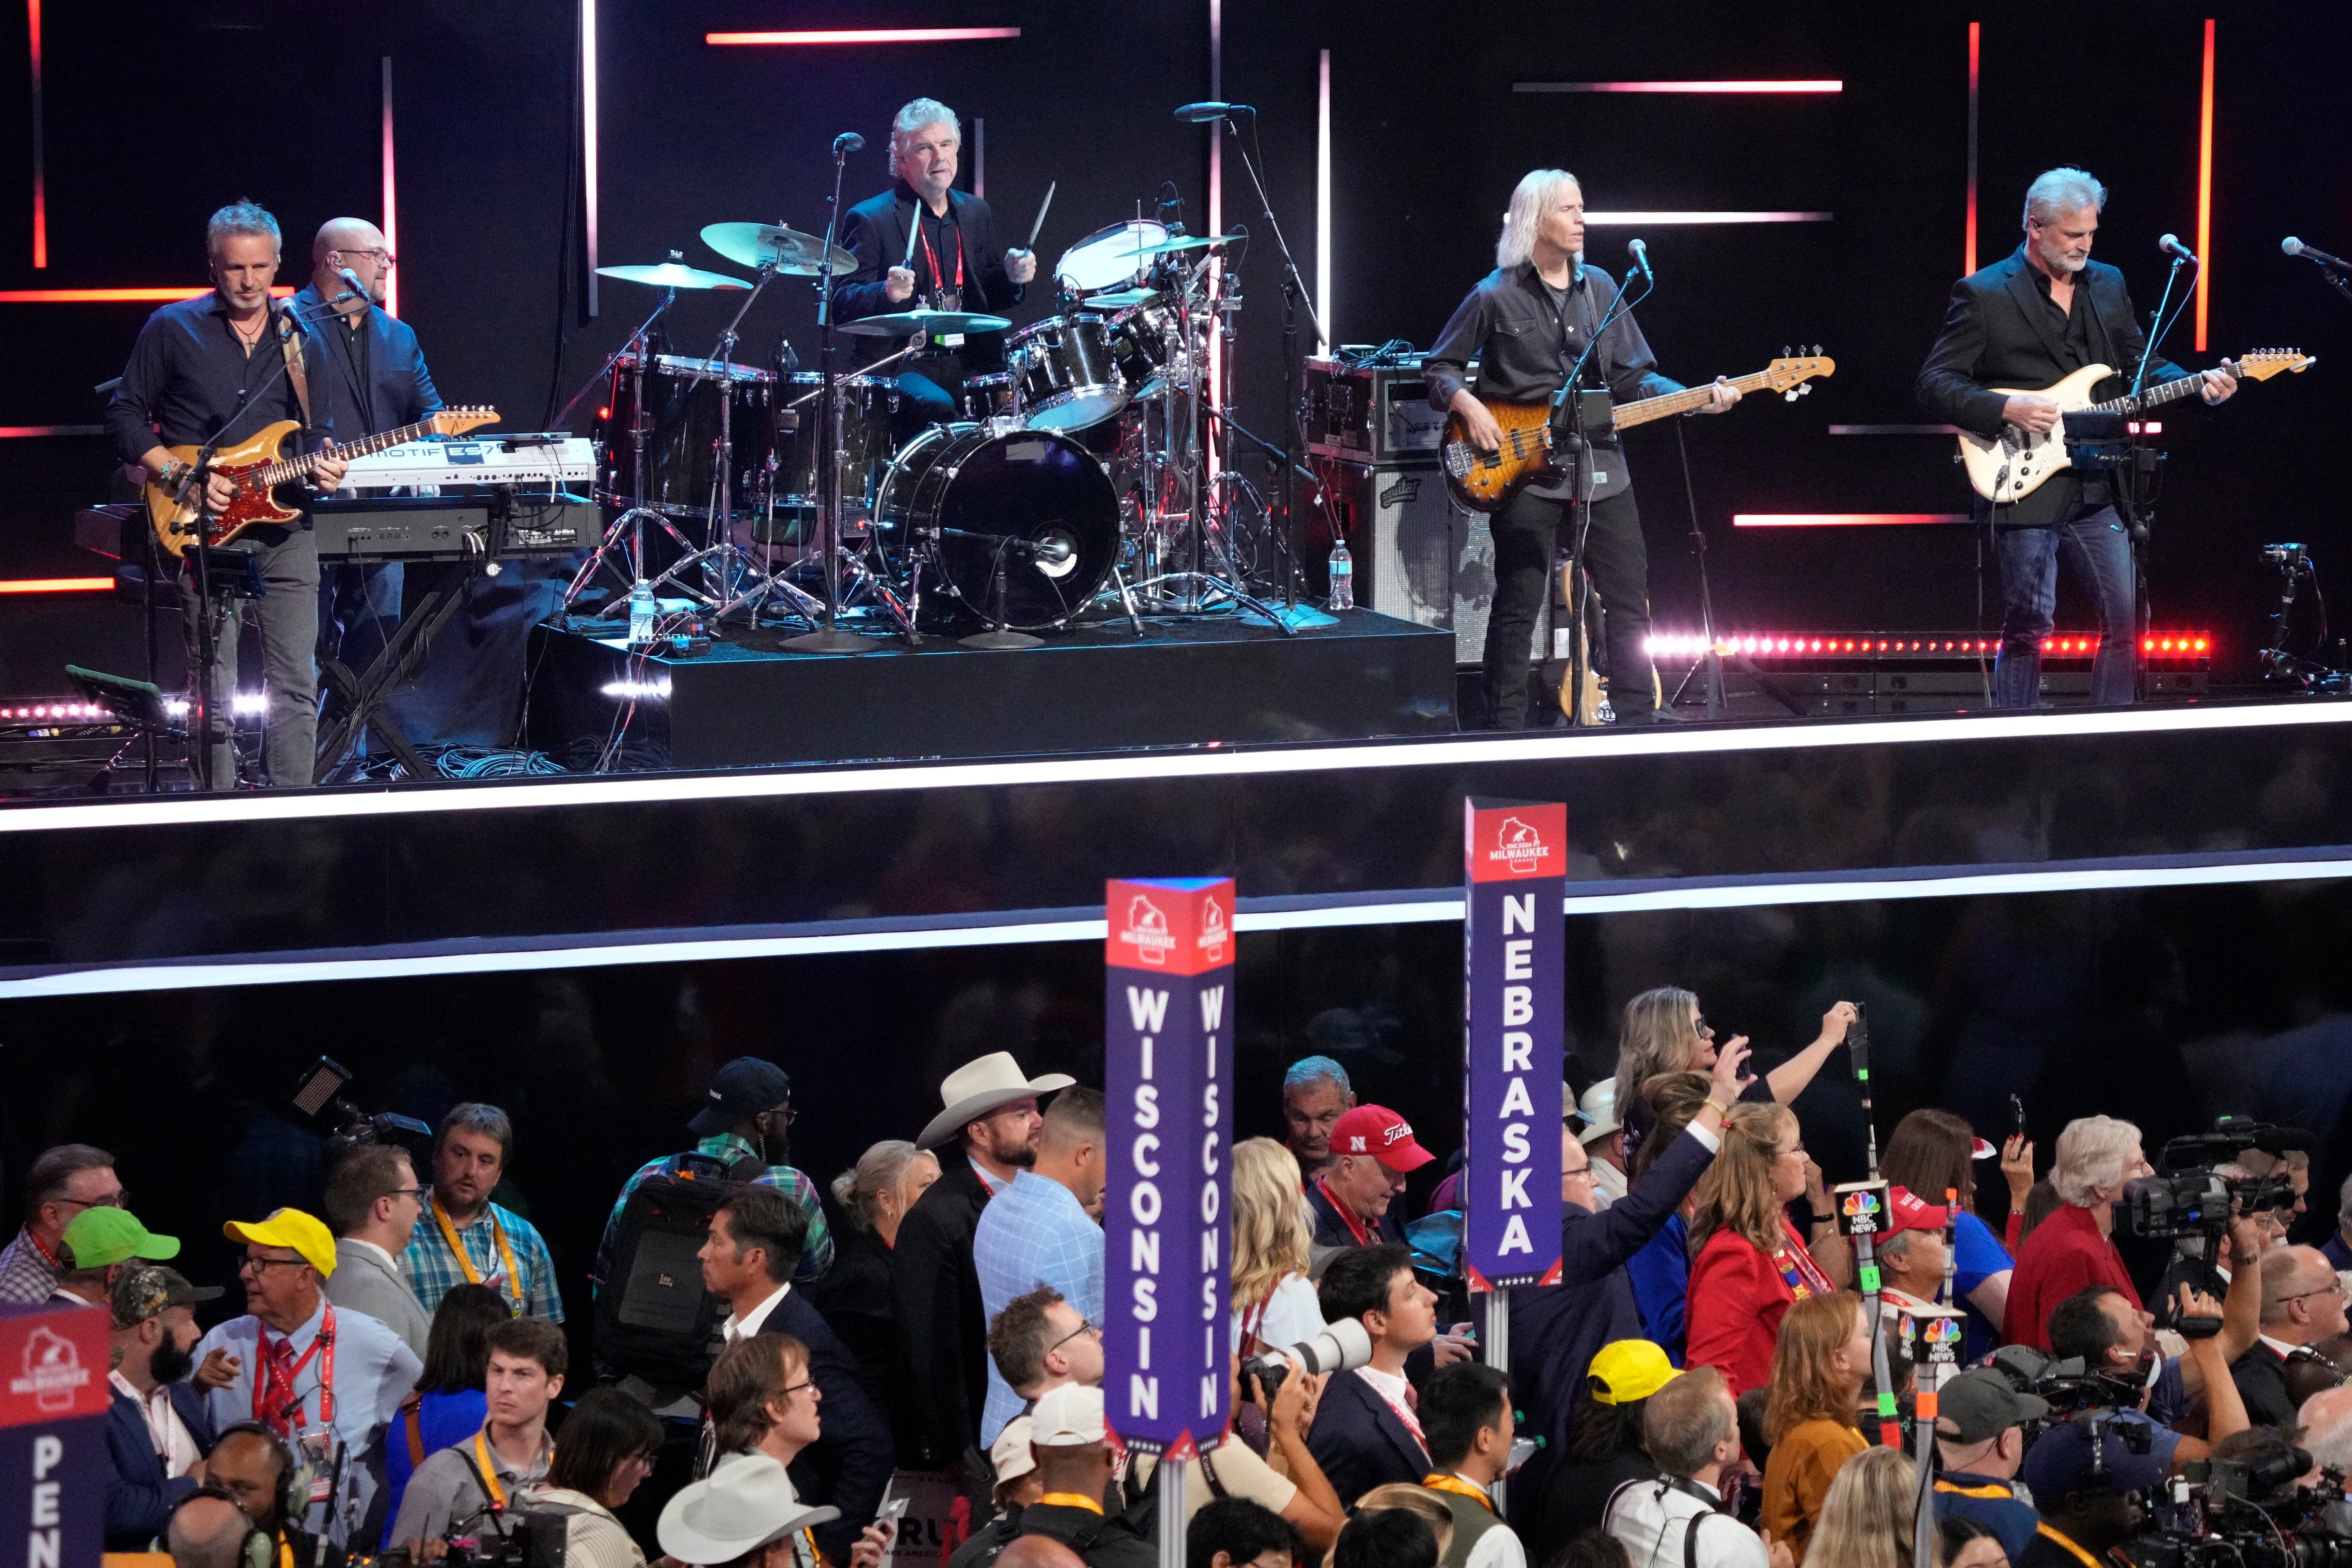 Who is the band playing at the 2024 RNC? They just happen to be from Nashville